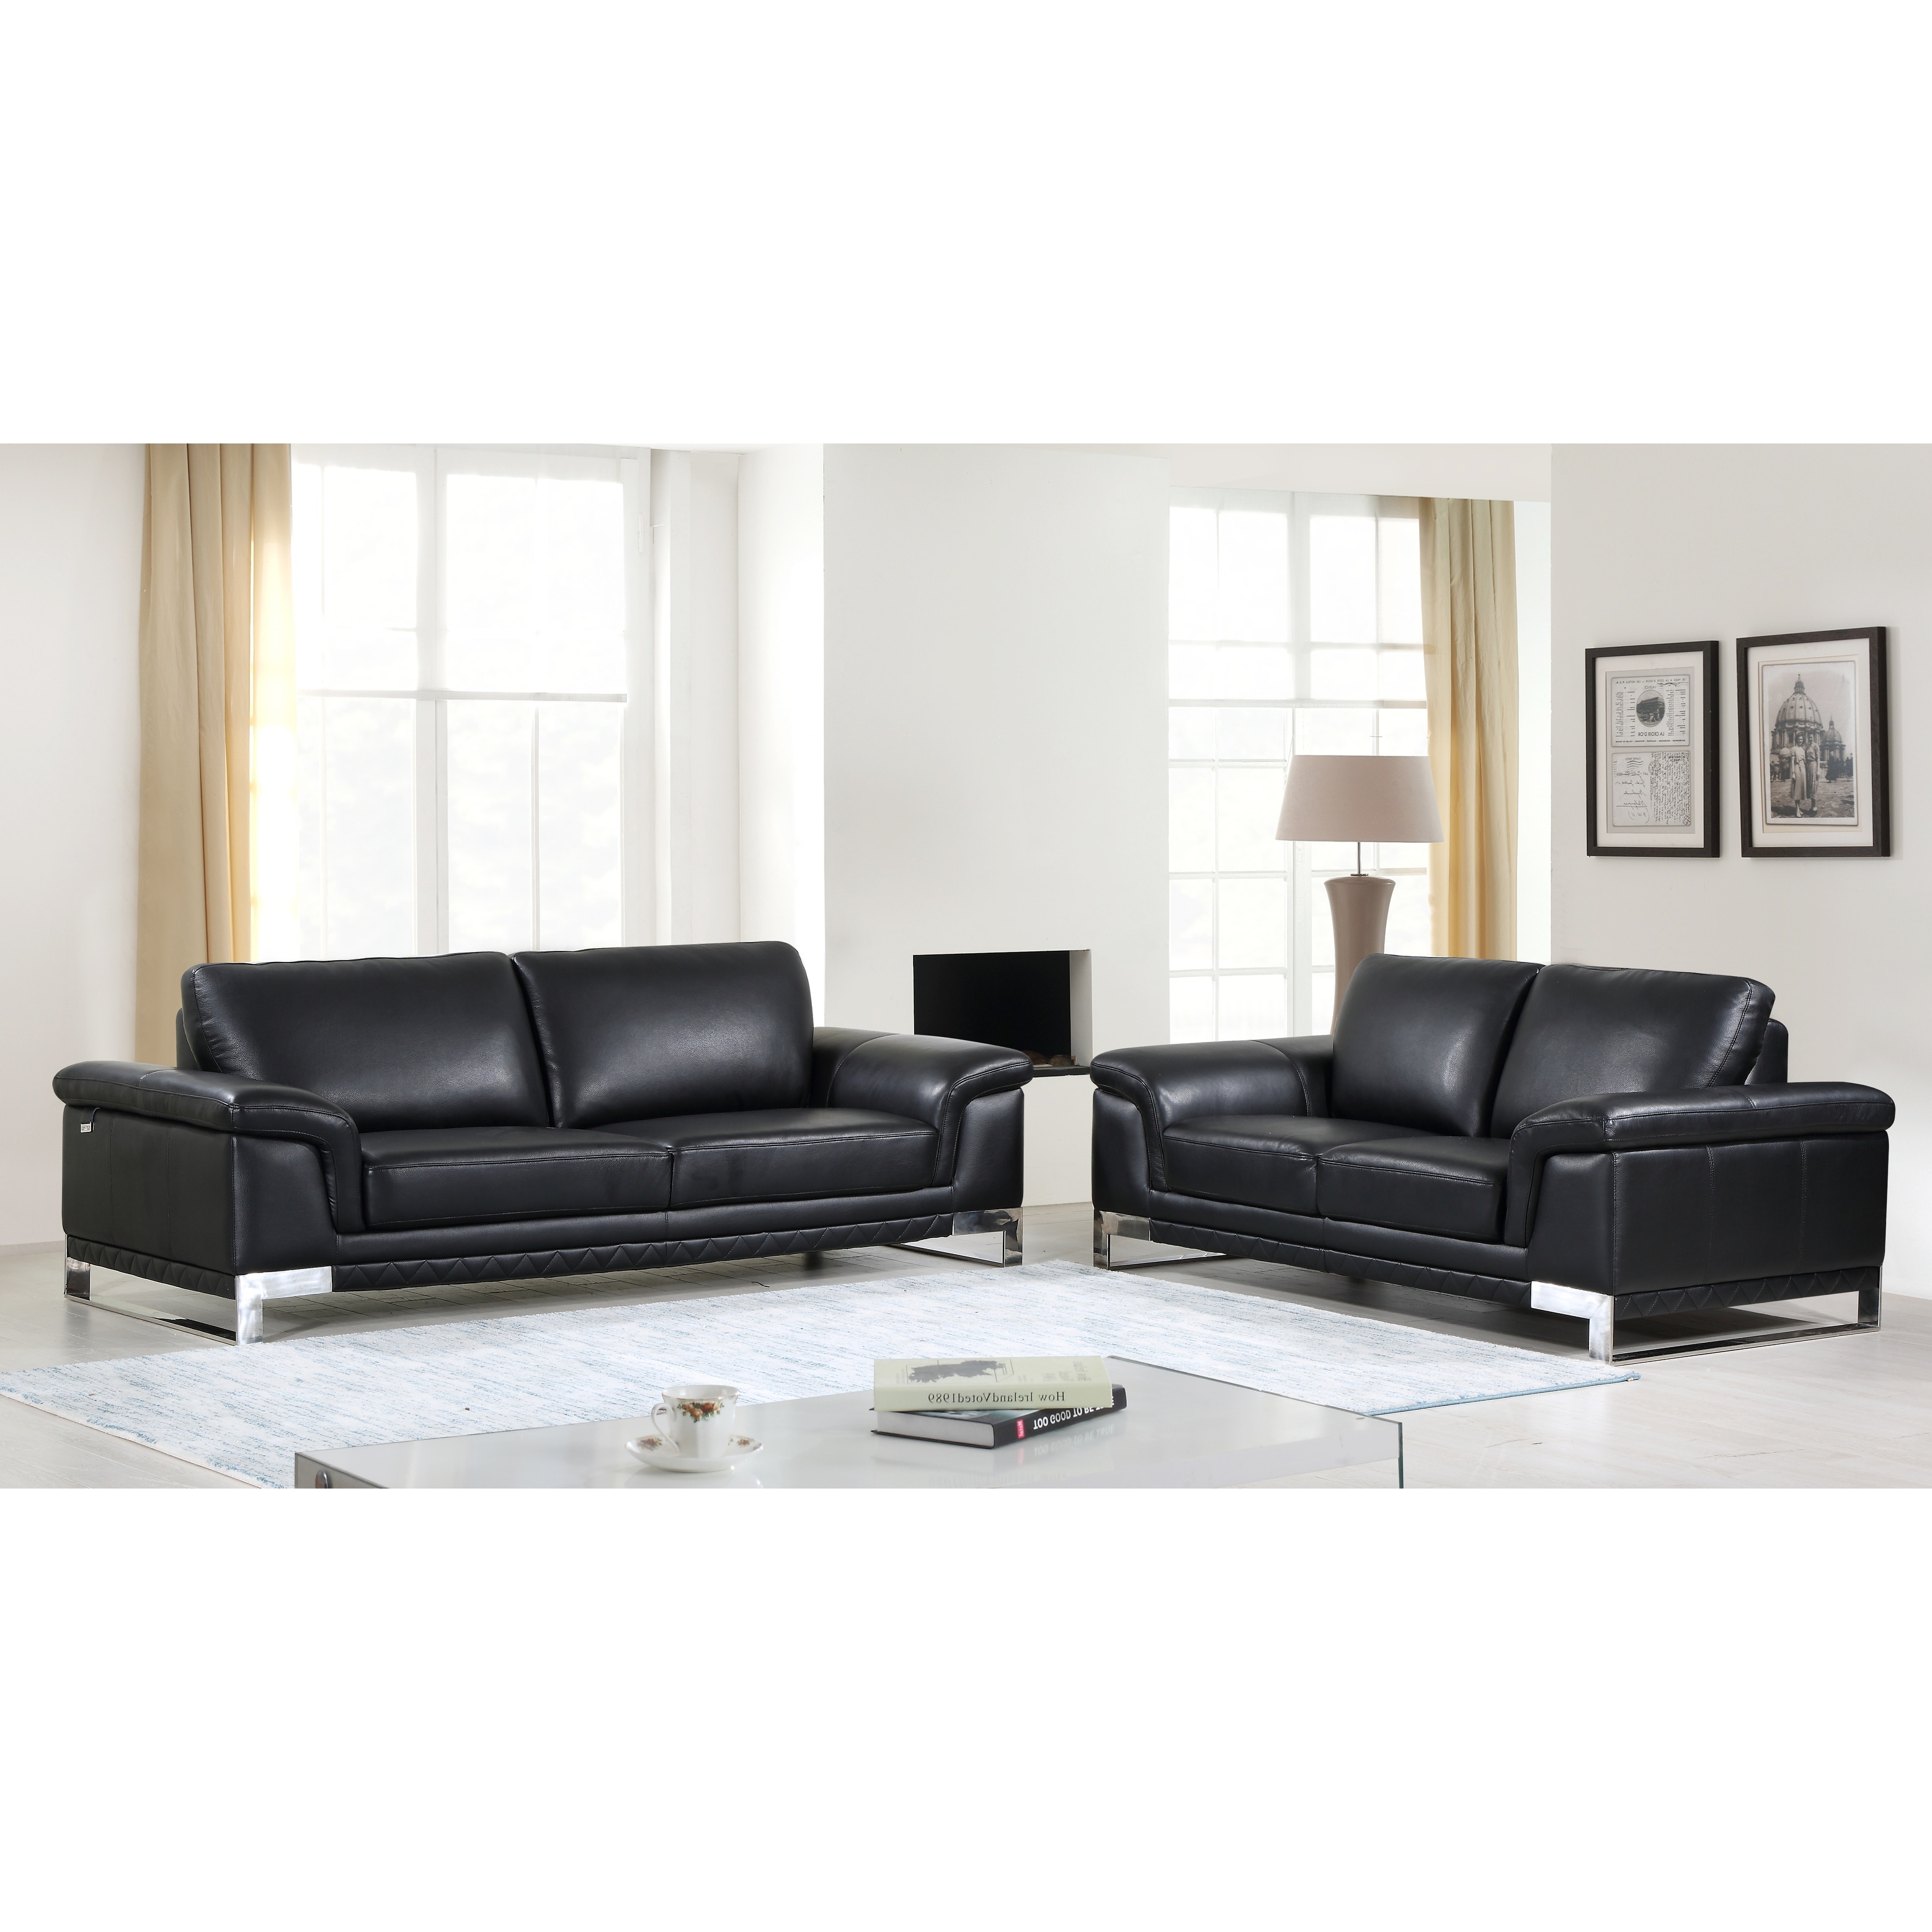 Details about   Formal Living Room Traditional Luxurious  Leather 2pc Sofa Set Sofa & Loveseat 